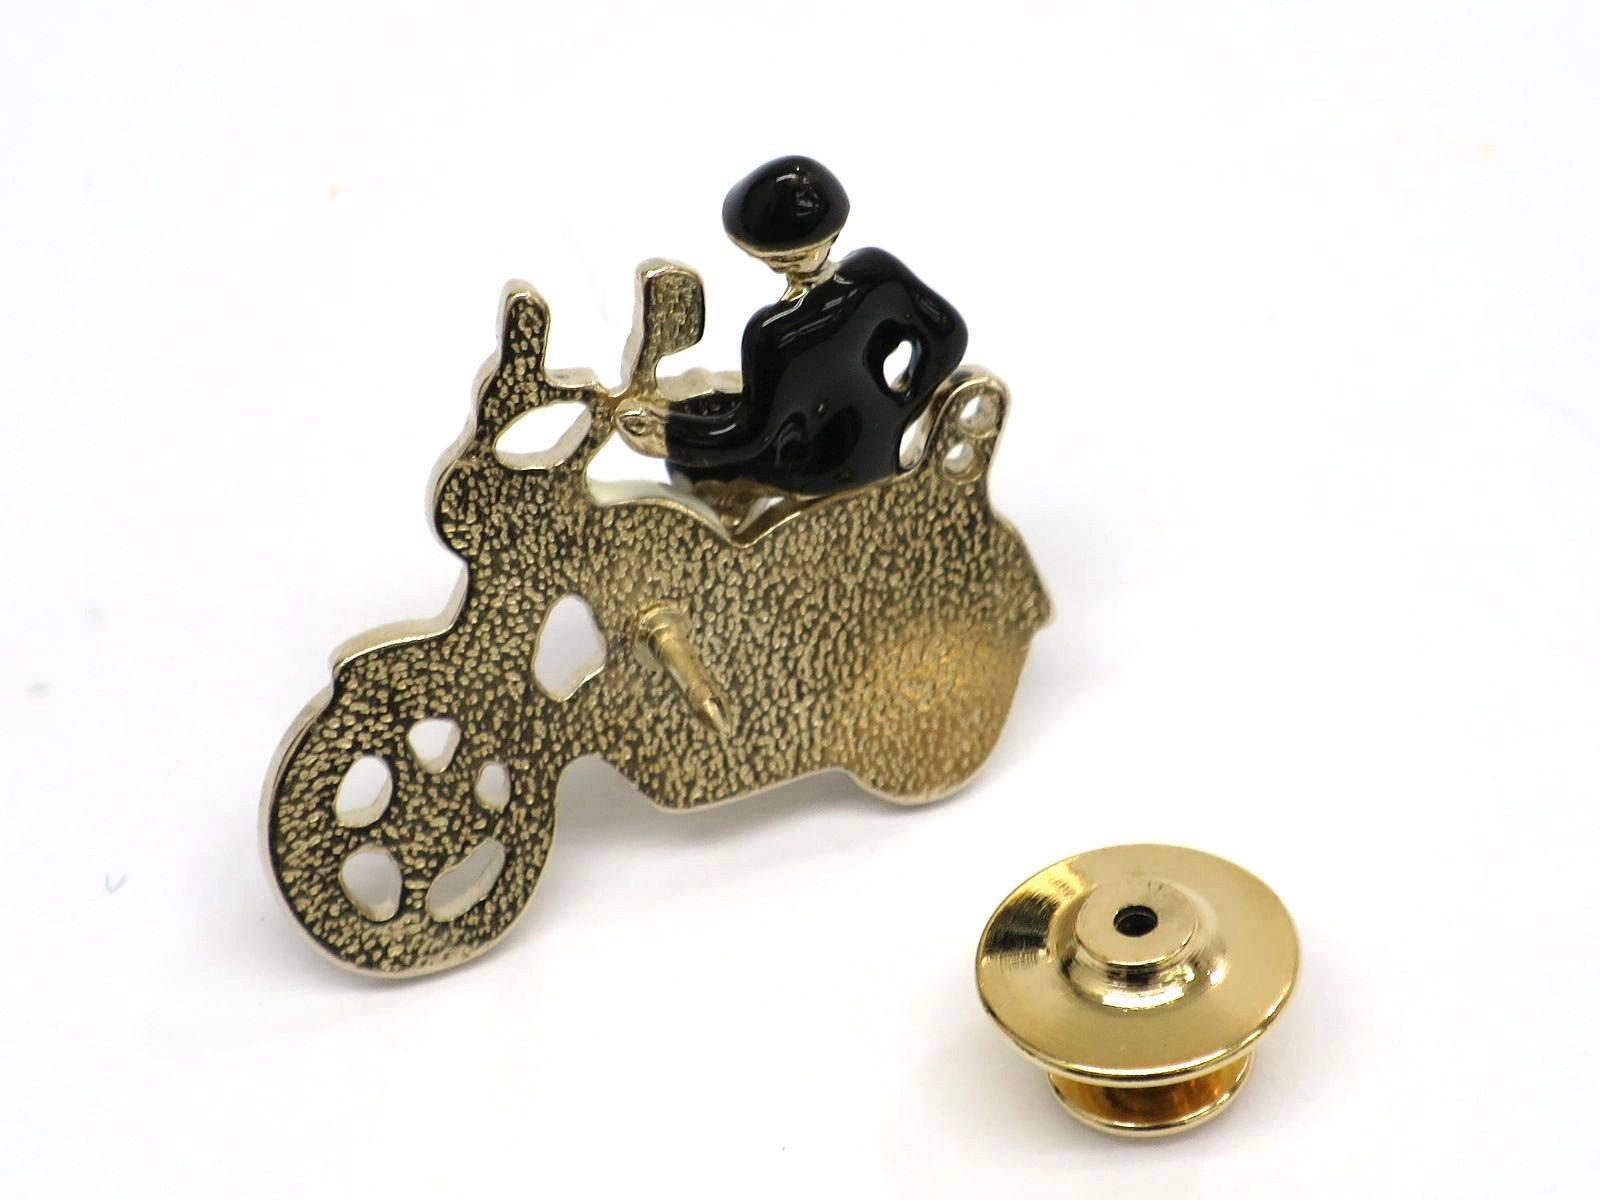 CURATOR'S NOTES

Talk about a conversation piece!  Adorn your favorite jacket lapel or blouse with this rare, whimsical Chanel brooch and you are sure to have fellow Chanel lovers' clamoring to find out where you found it.

Expecting a quick